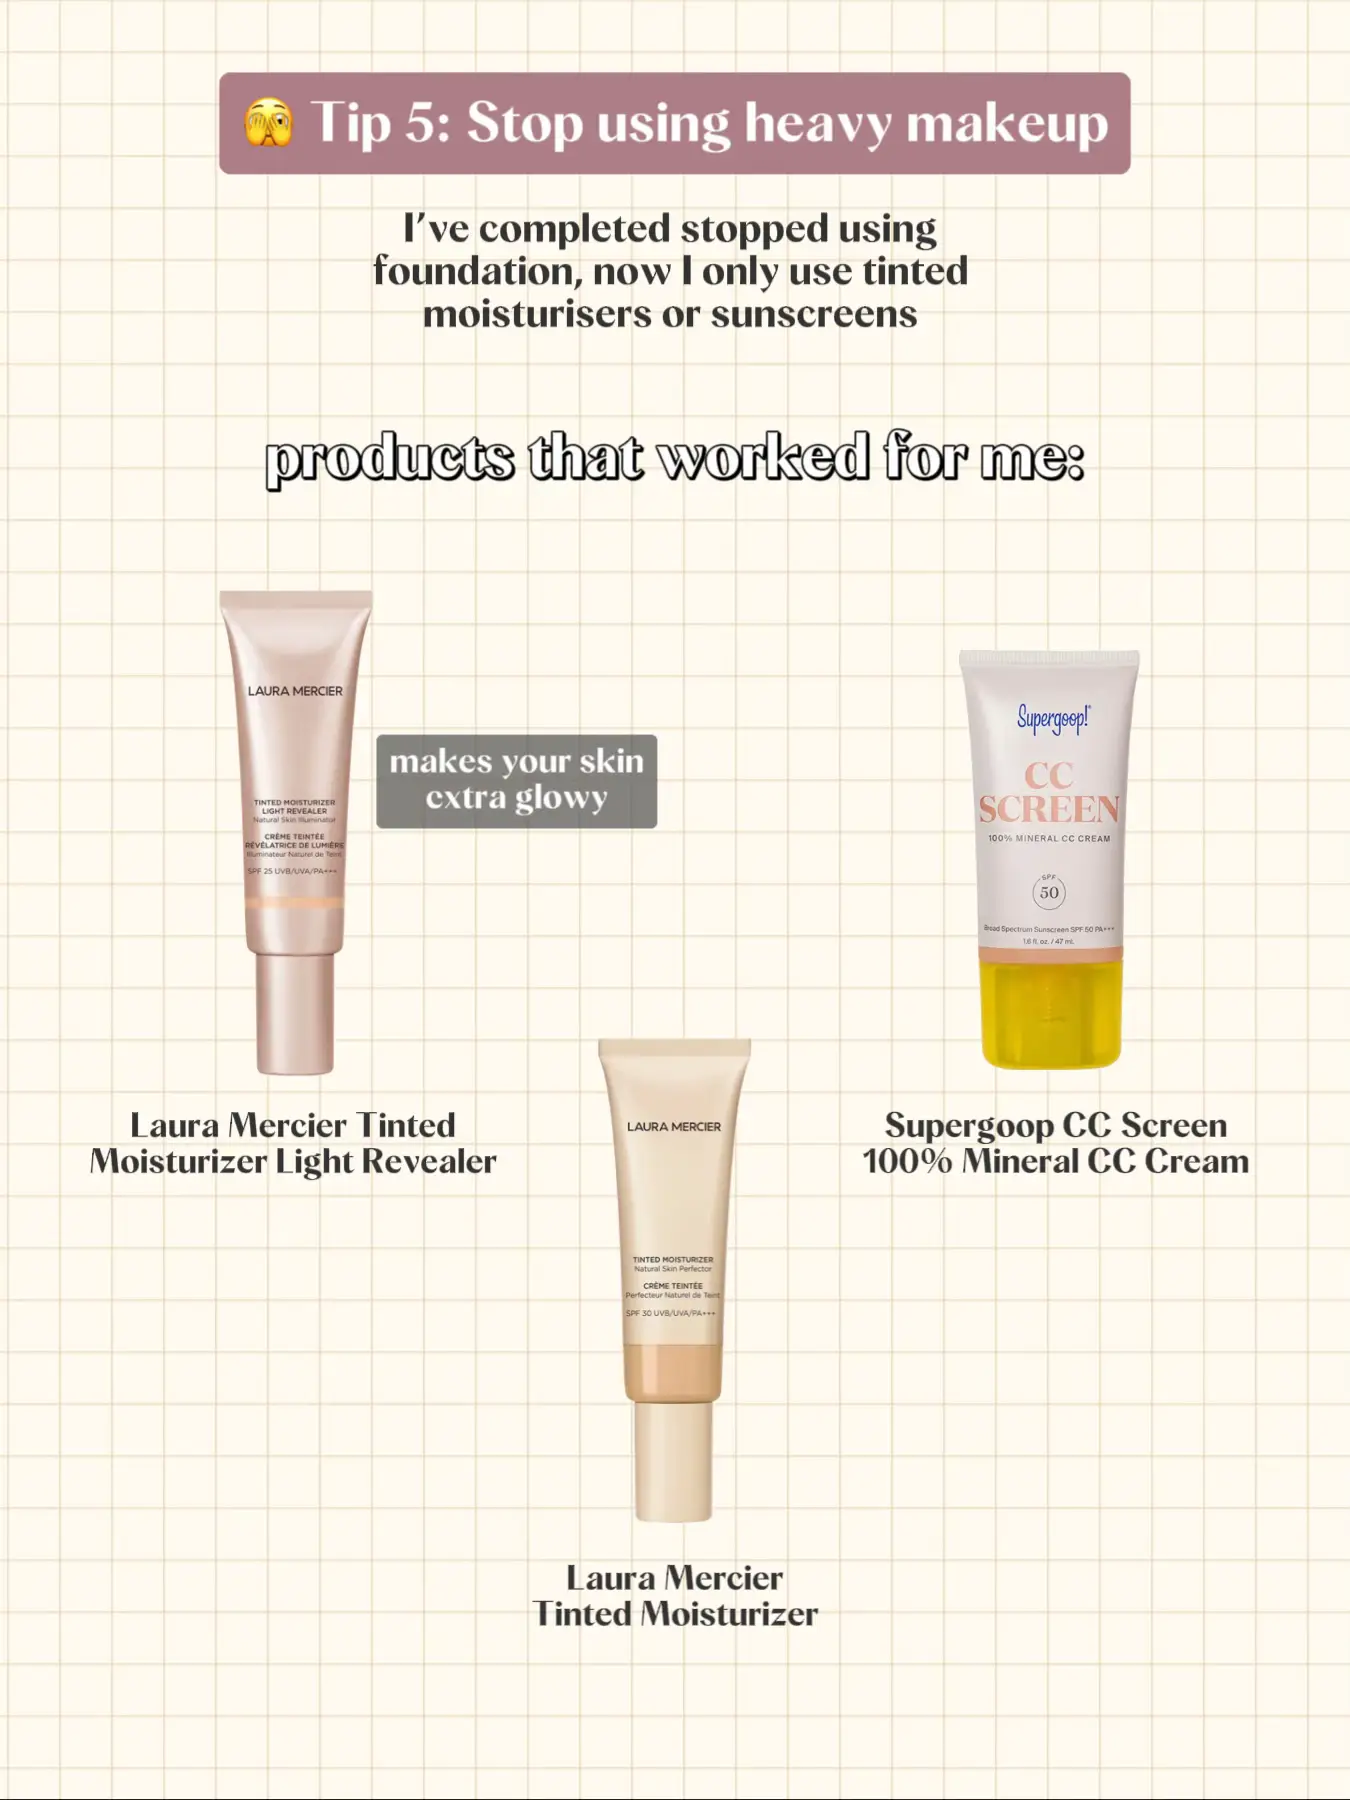 Acne tips and products that changed my life 😭's images(8)